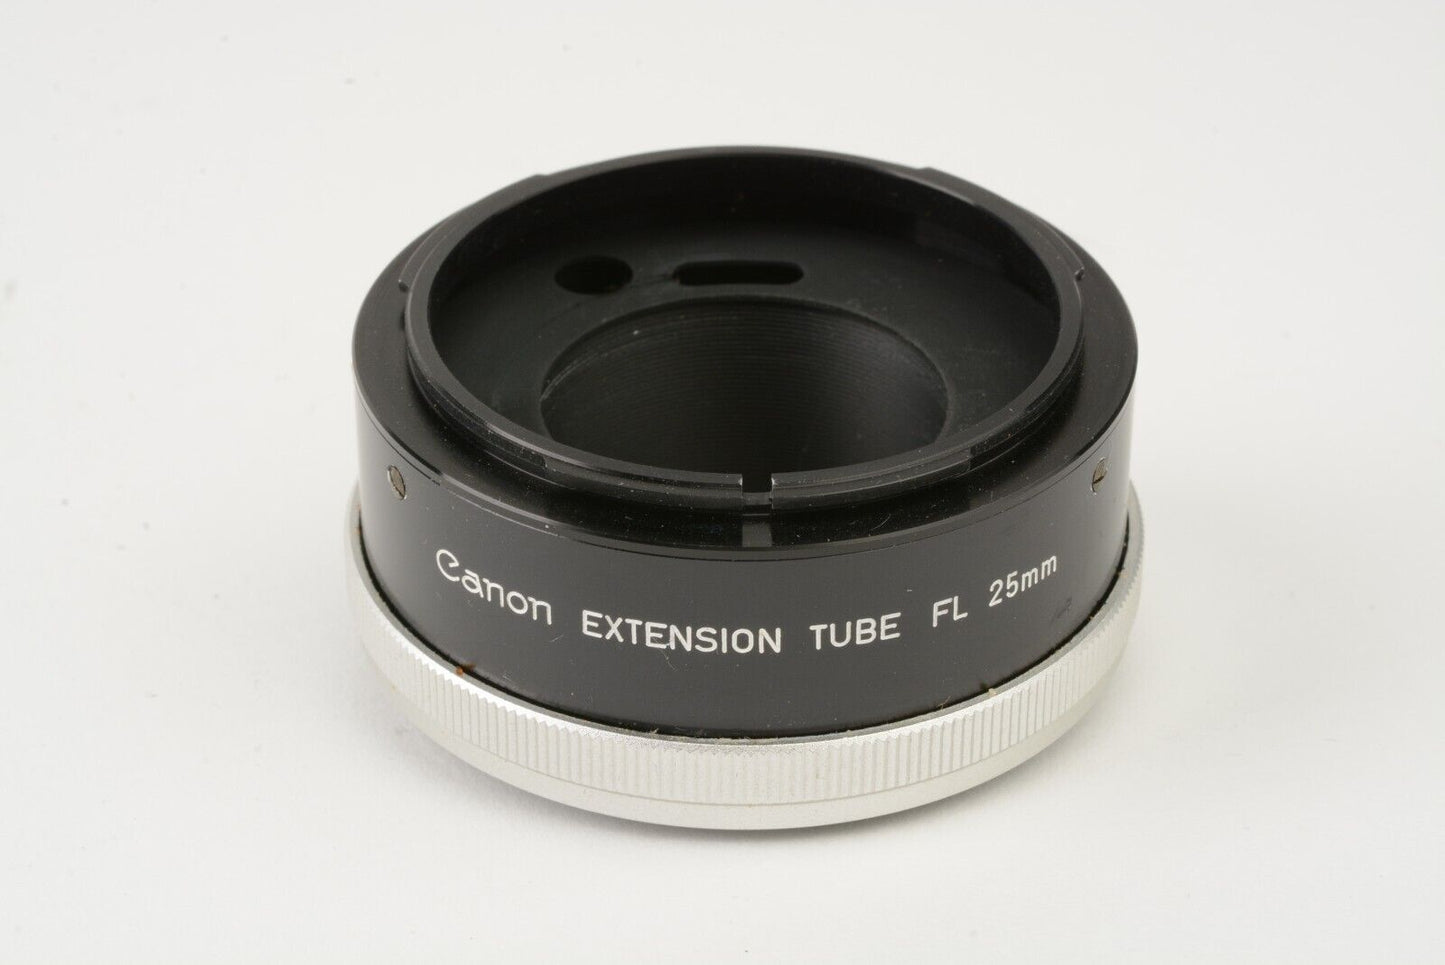 EXC++ CANON FL25 EXTENSION TUBE, BOXED, VERY CLEAN, INSTRUCTIONS